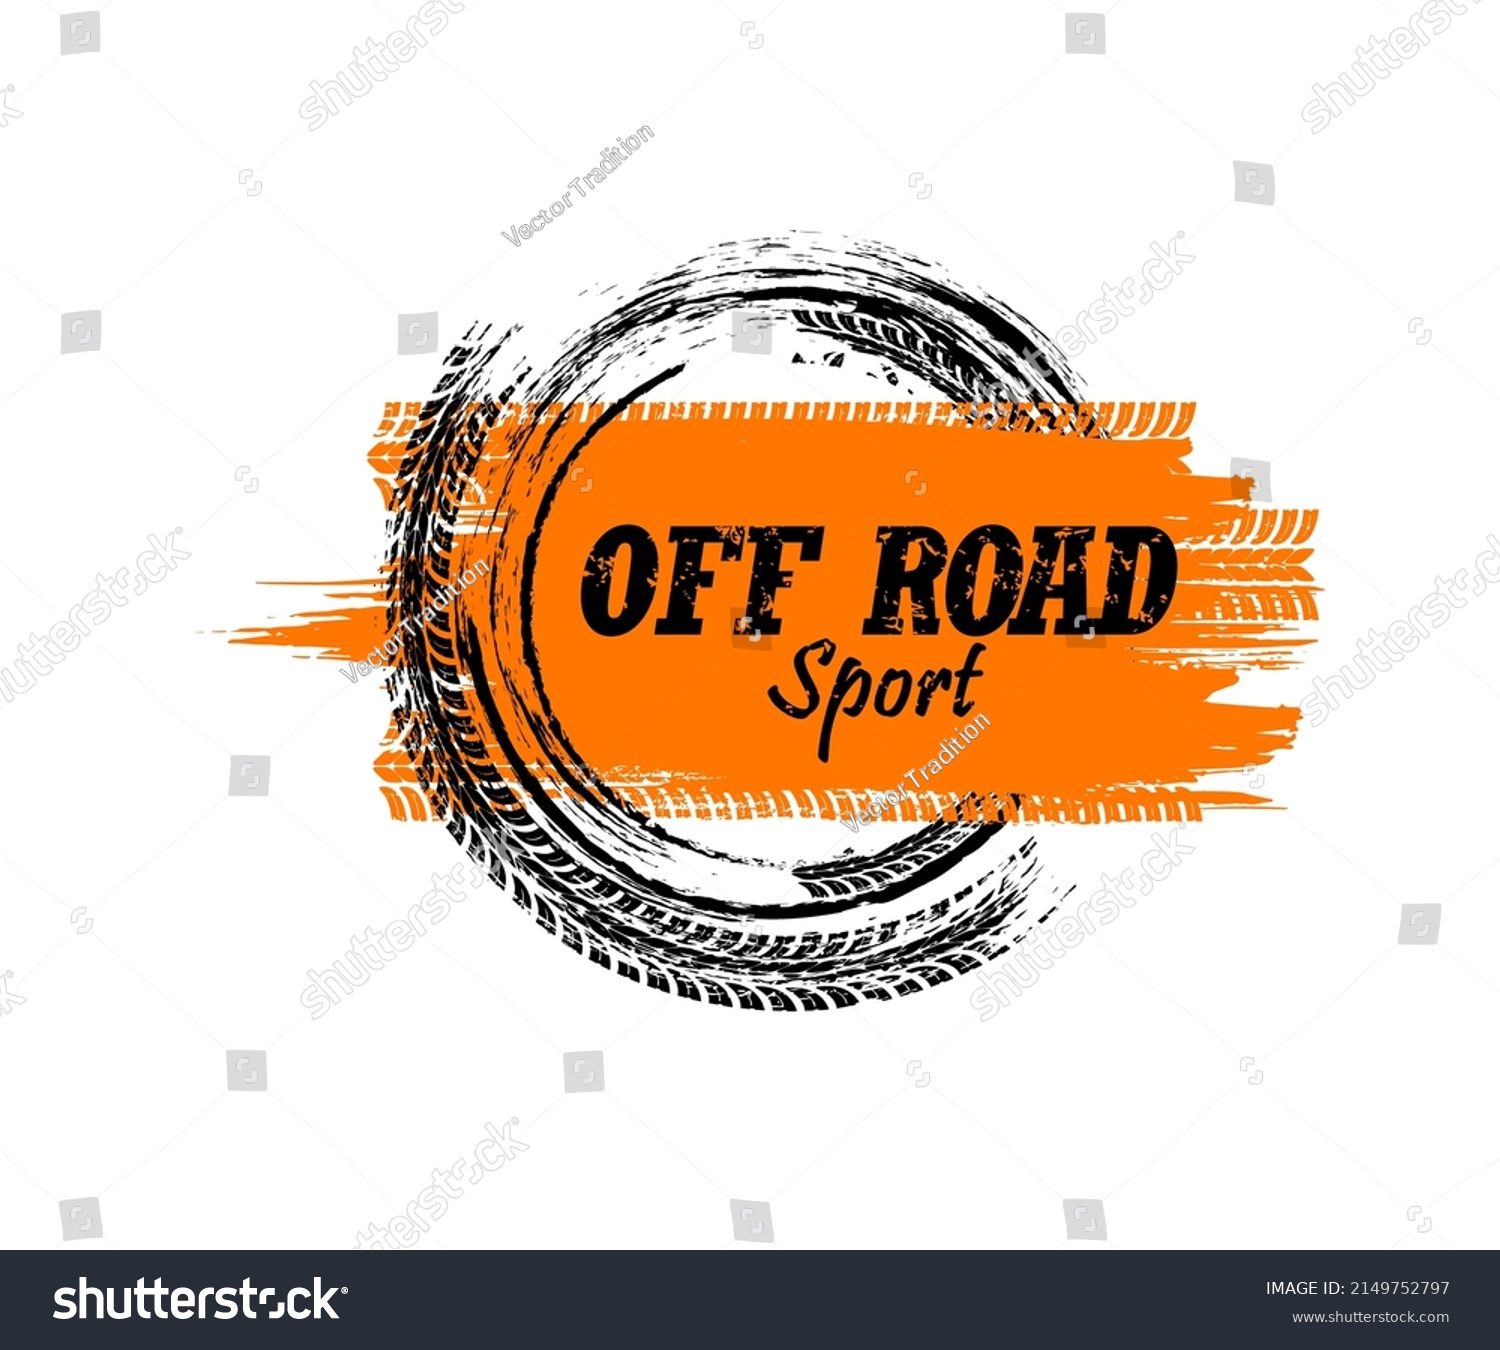 SVG of Offroad sport grunge banner. Tire tracks of race car or motorcycle wheels. Mud road tyre tread marks and dirt trails of rally truck, auto and bike, drift show and motocross off road sport svg